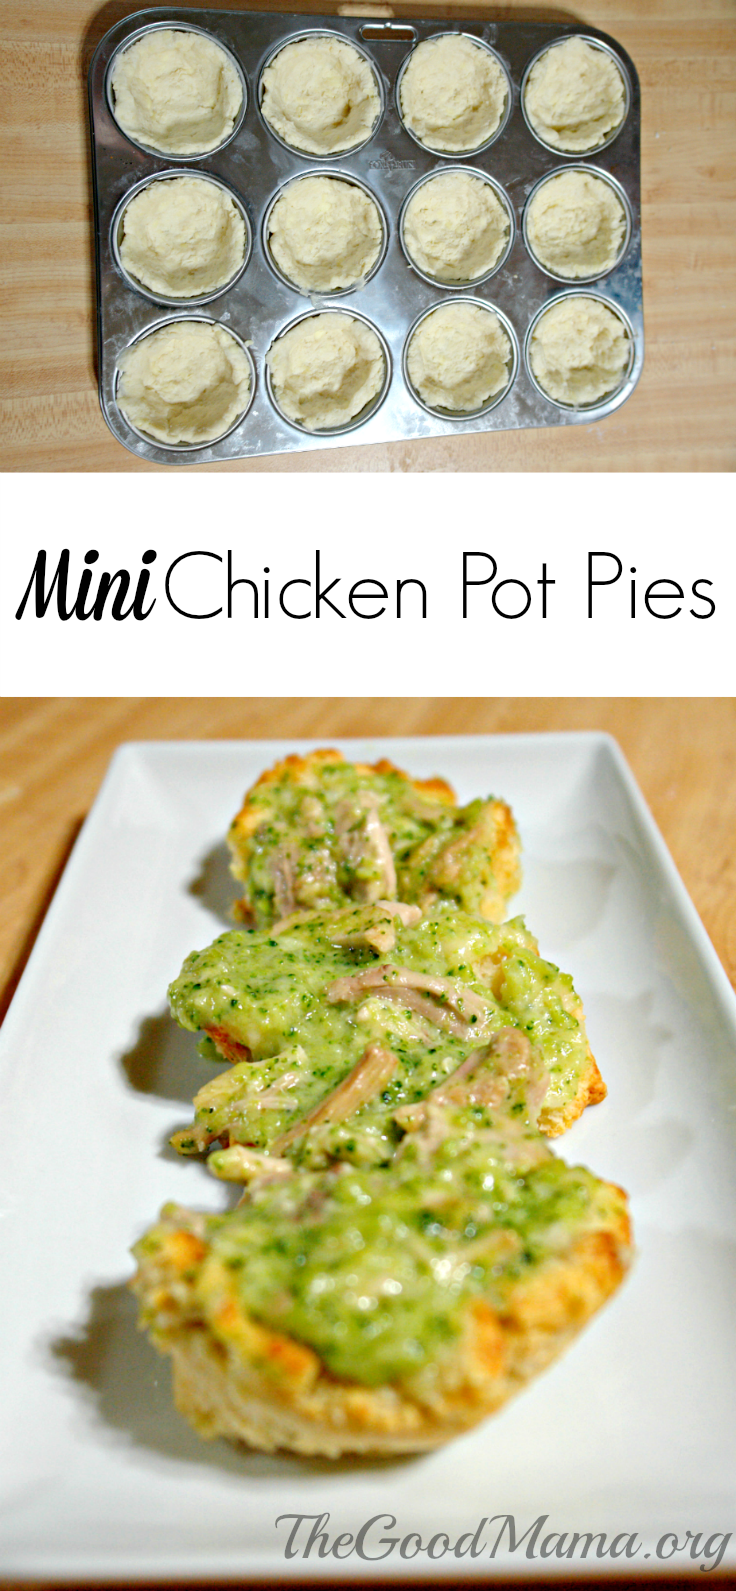 Mini Chicken Pot Pie Recipe- The perfect appetizer for a fall or winter party!